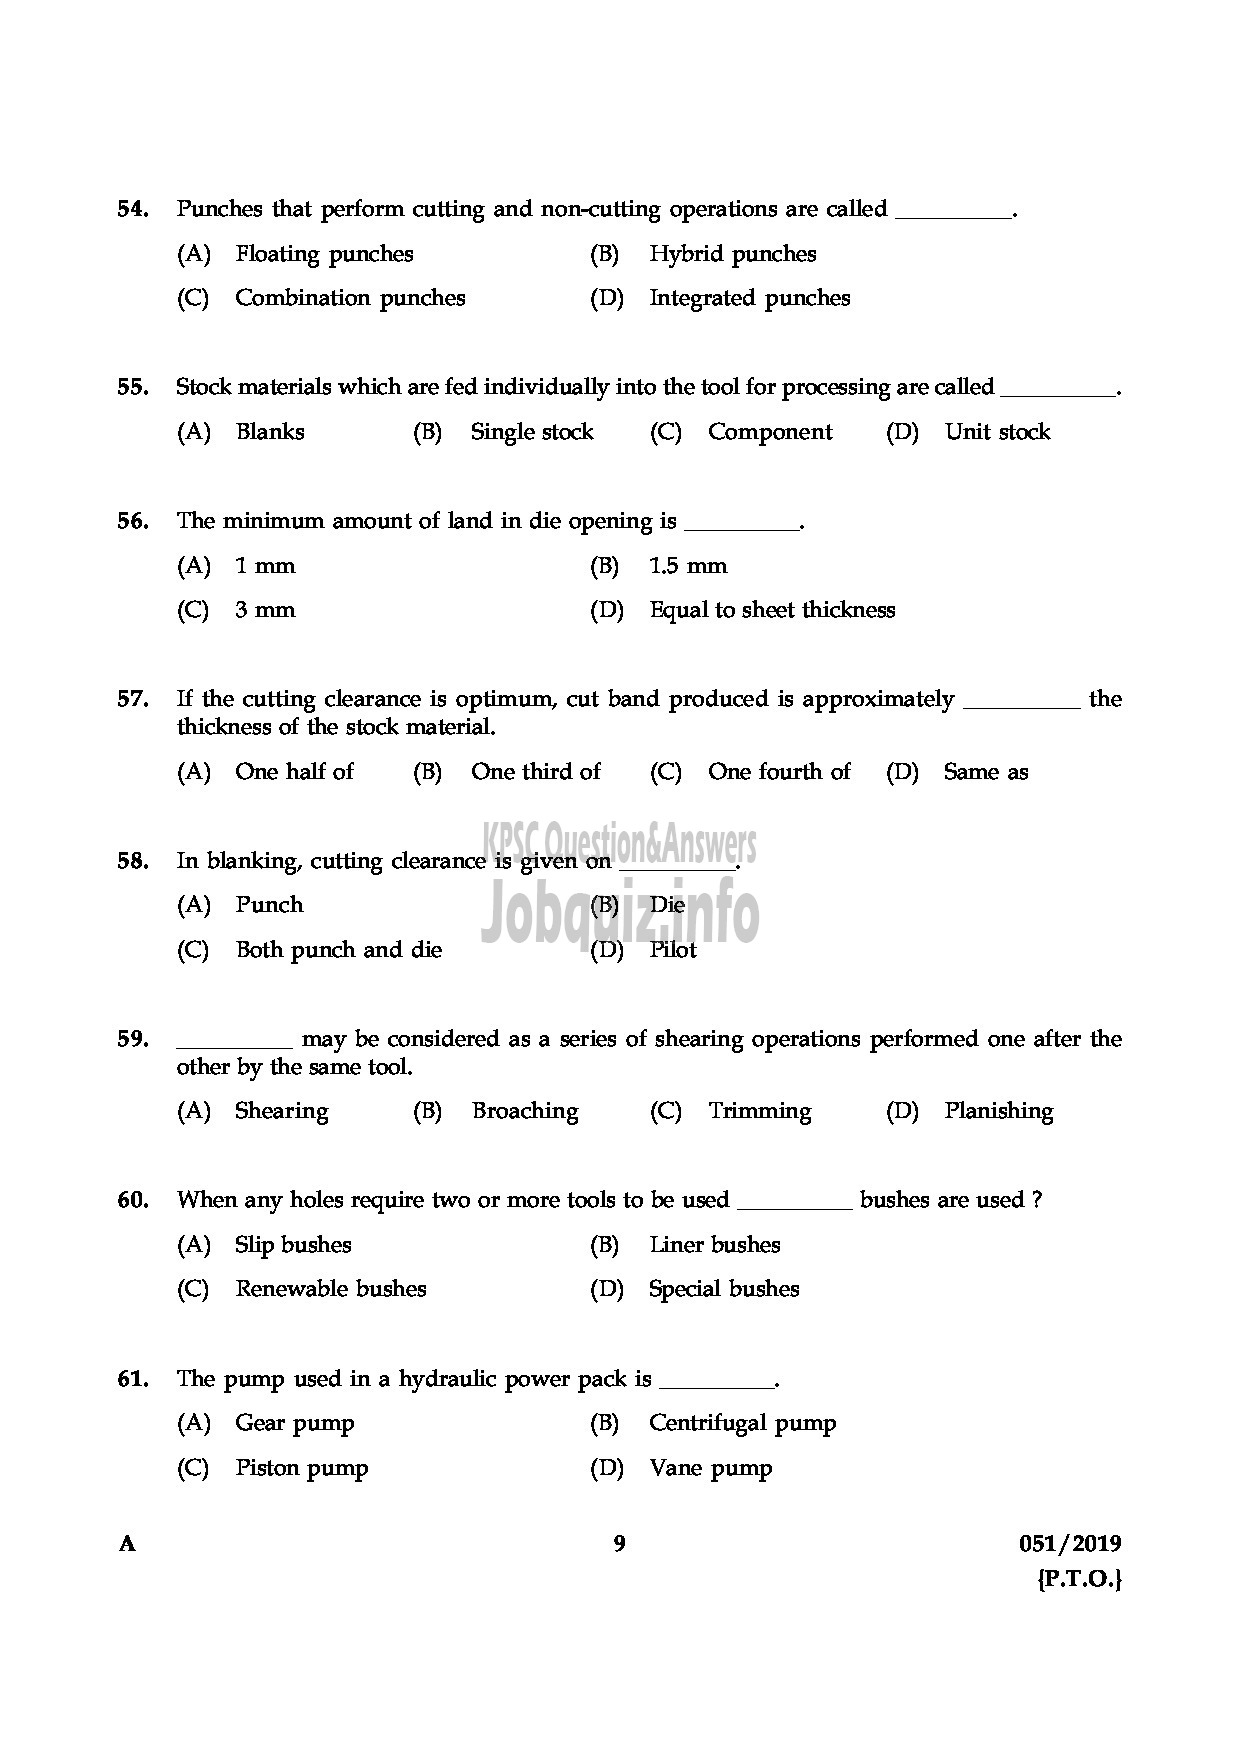 Kerala PSC Question Paper - JUNIOR INSTRUCTOR TOOL & DIE MAKER INDUSTRIAL TRAINING English -9